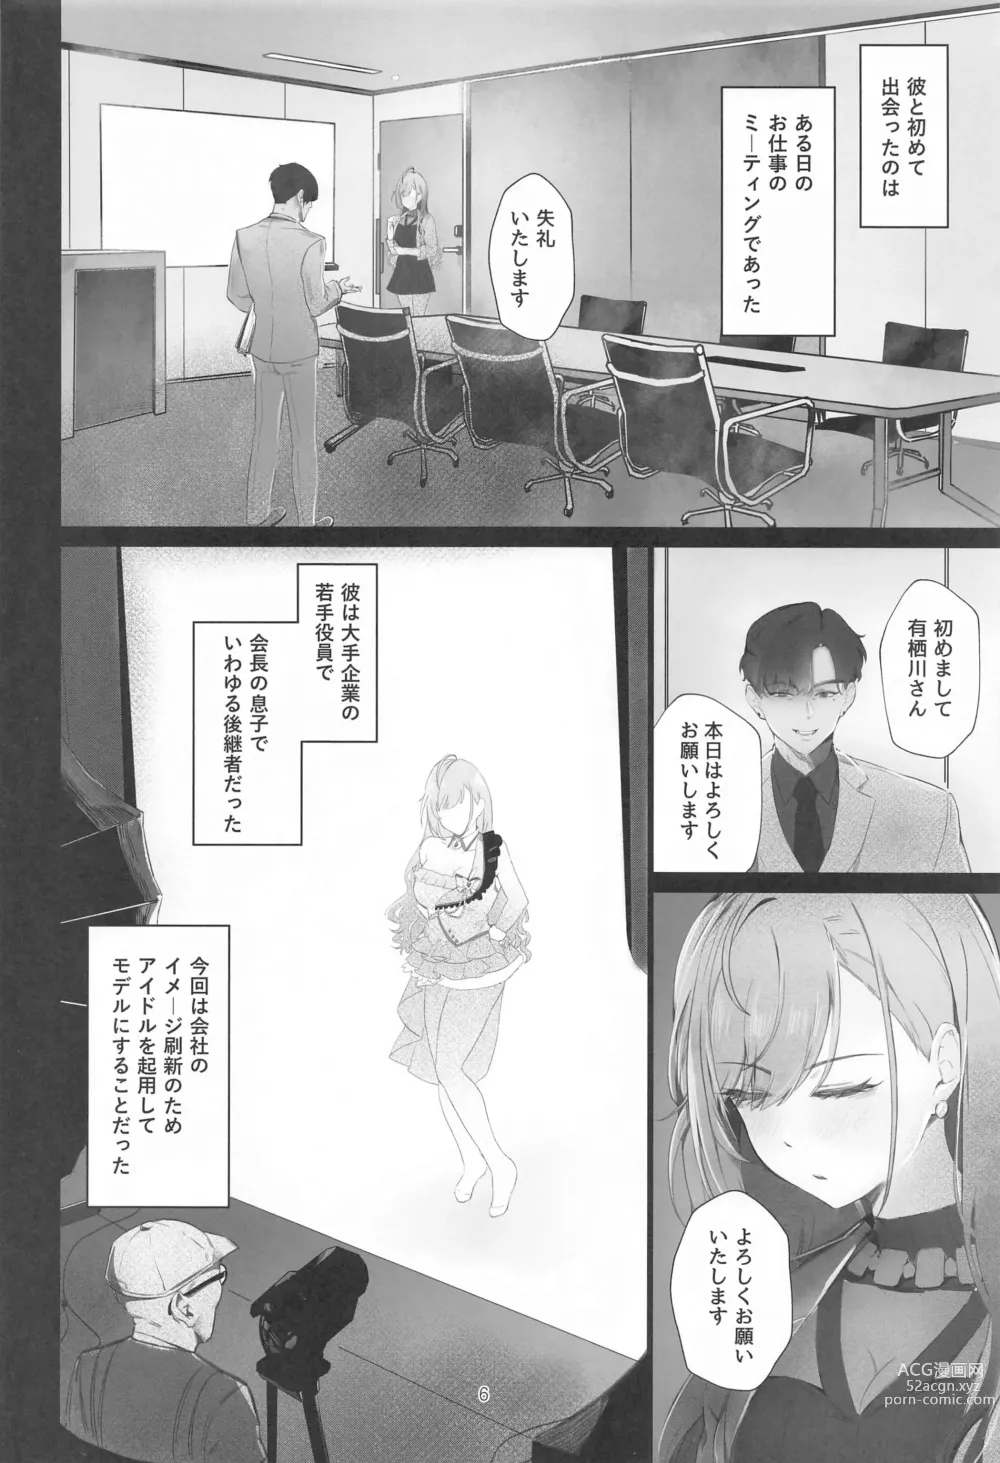 Page 5 of doujinshi takeover